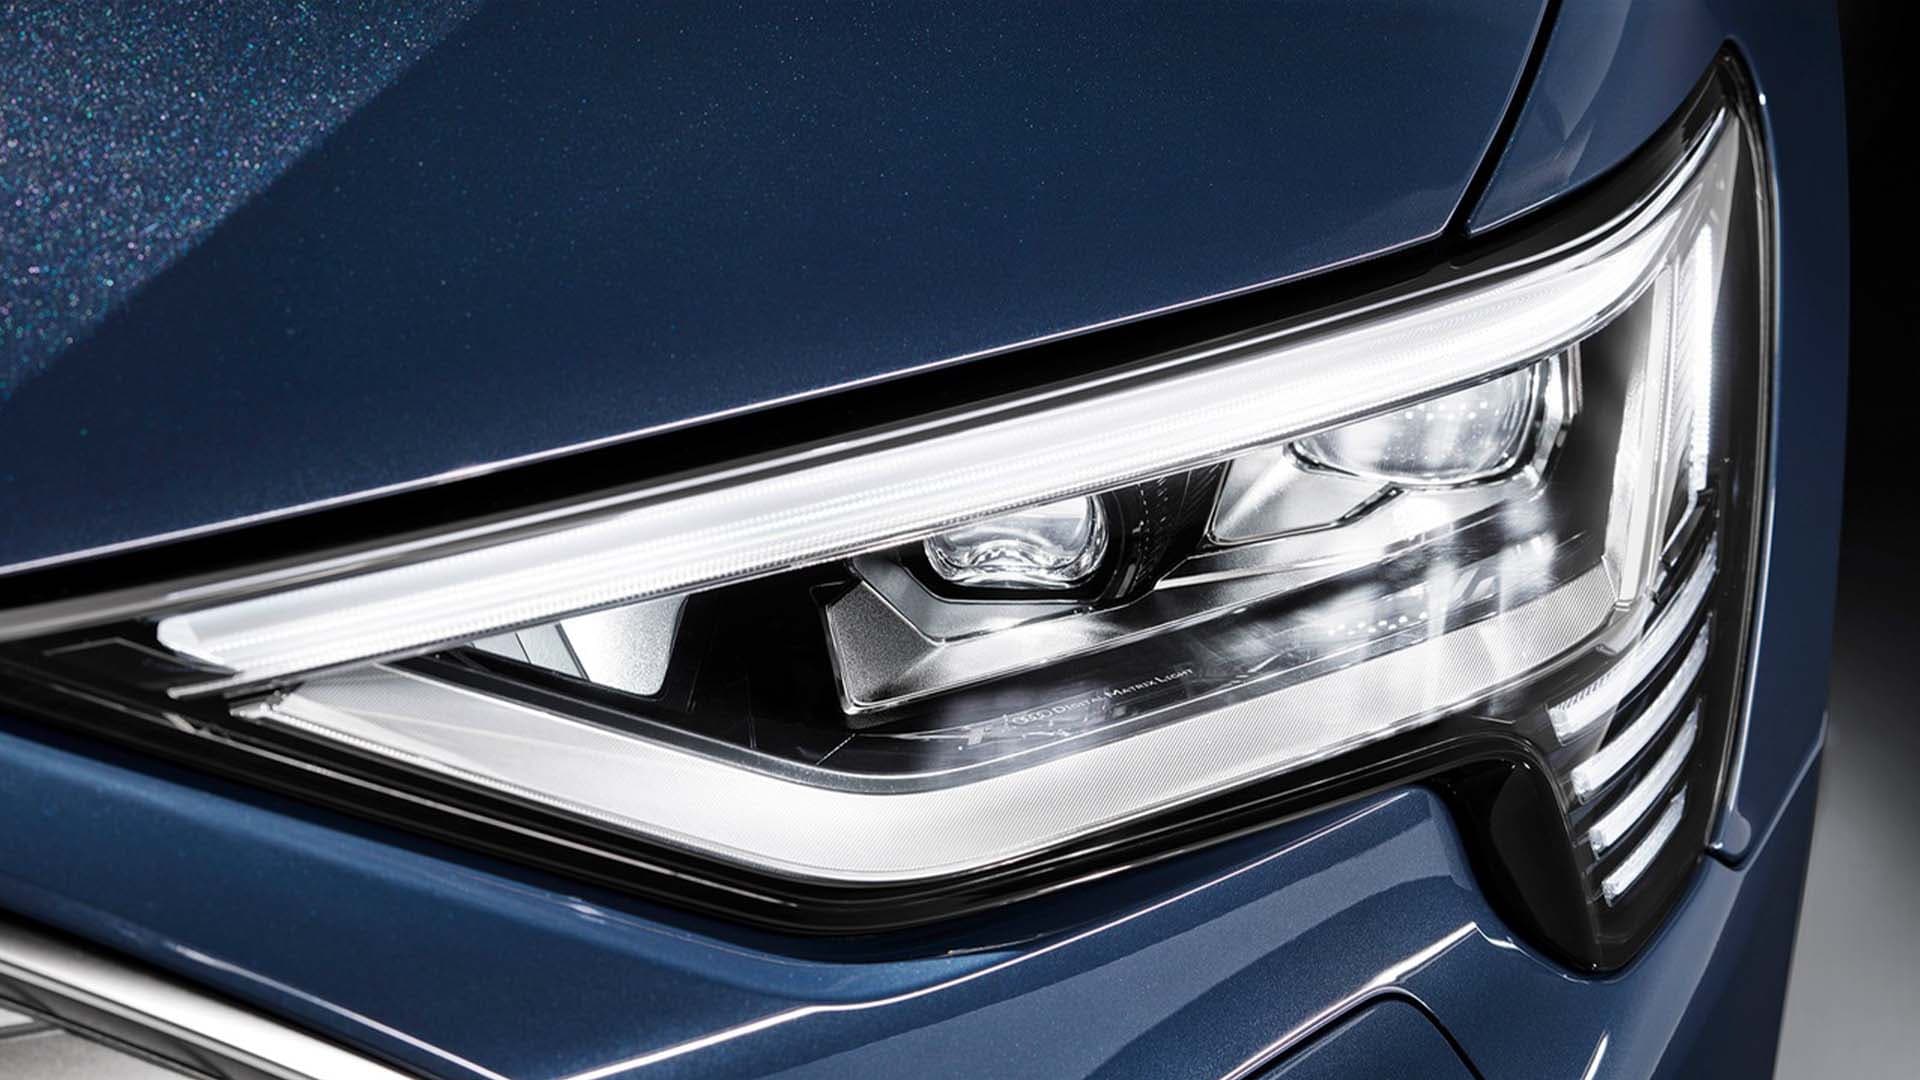 Adaptive Headlights Will Finally Come to the US, Thanks to the Infrastructure Bill